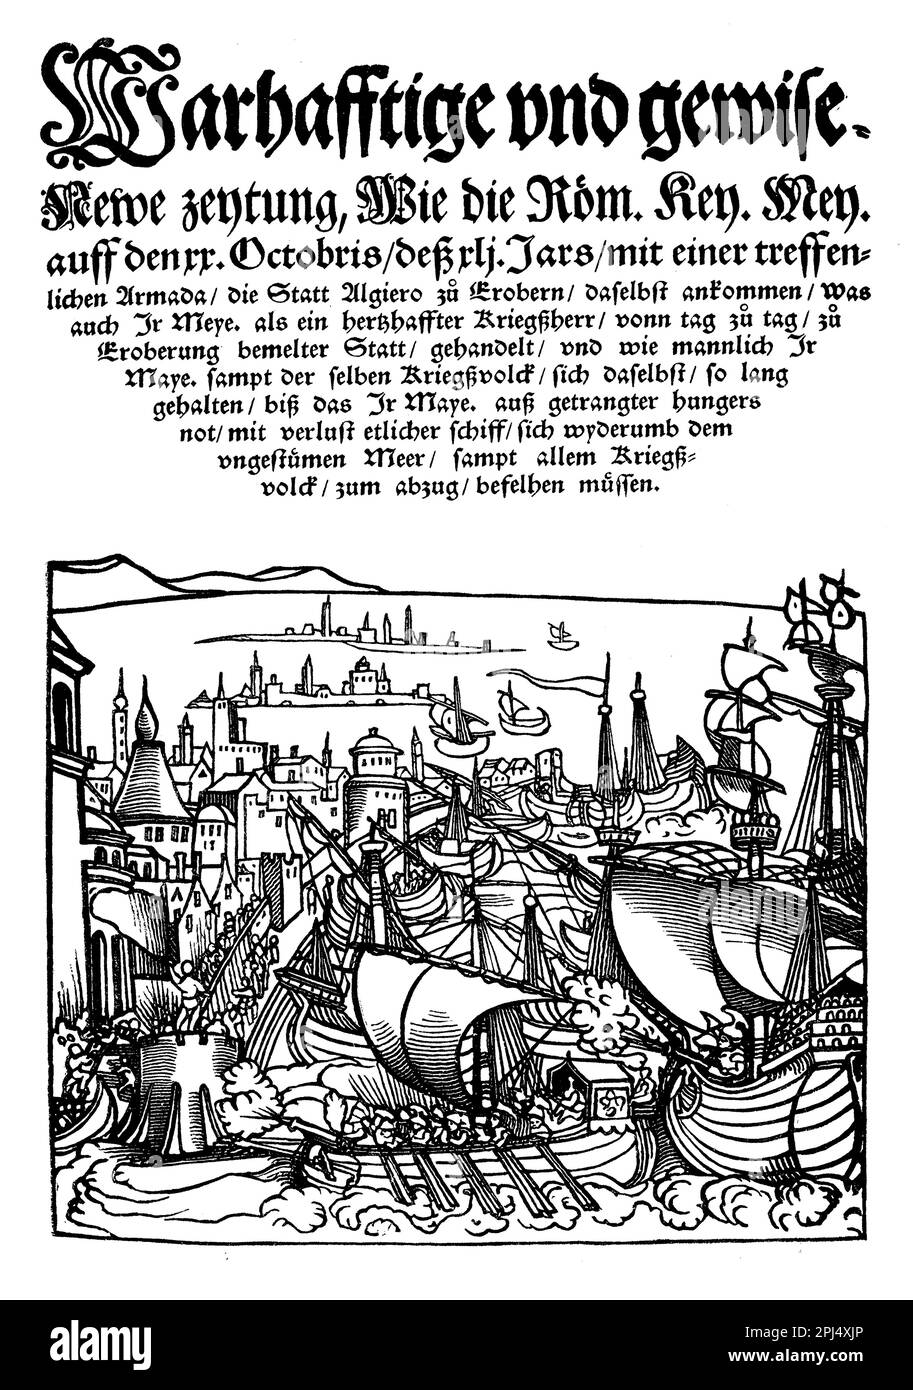 Emperor Charles V of Spain launched a military expedition against the city of Algiers in 1541 to suppress piracy and secure control over the Mediterranean. The campaign ultimately failed, with the Spanish forces suffering significant losses due to harsh weather and strong resistance from the Ottomans and their allies. Printed pamphlet. Stock Photo